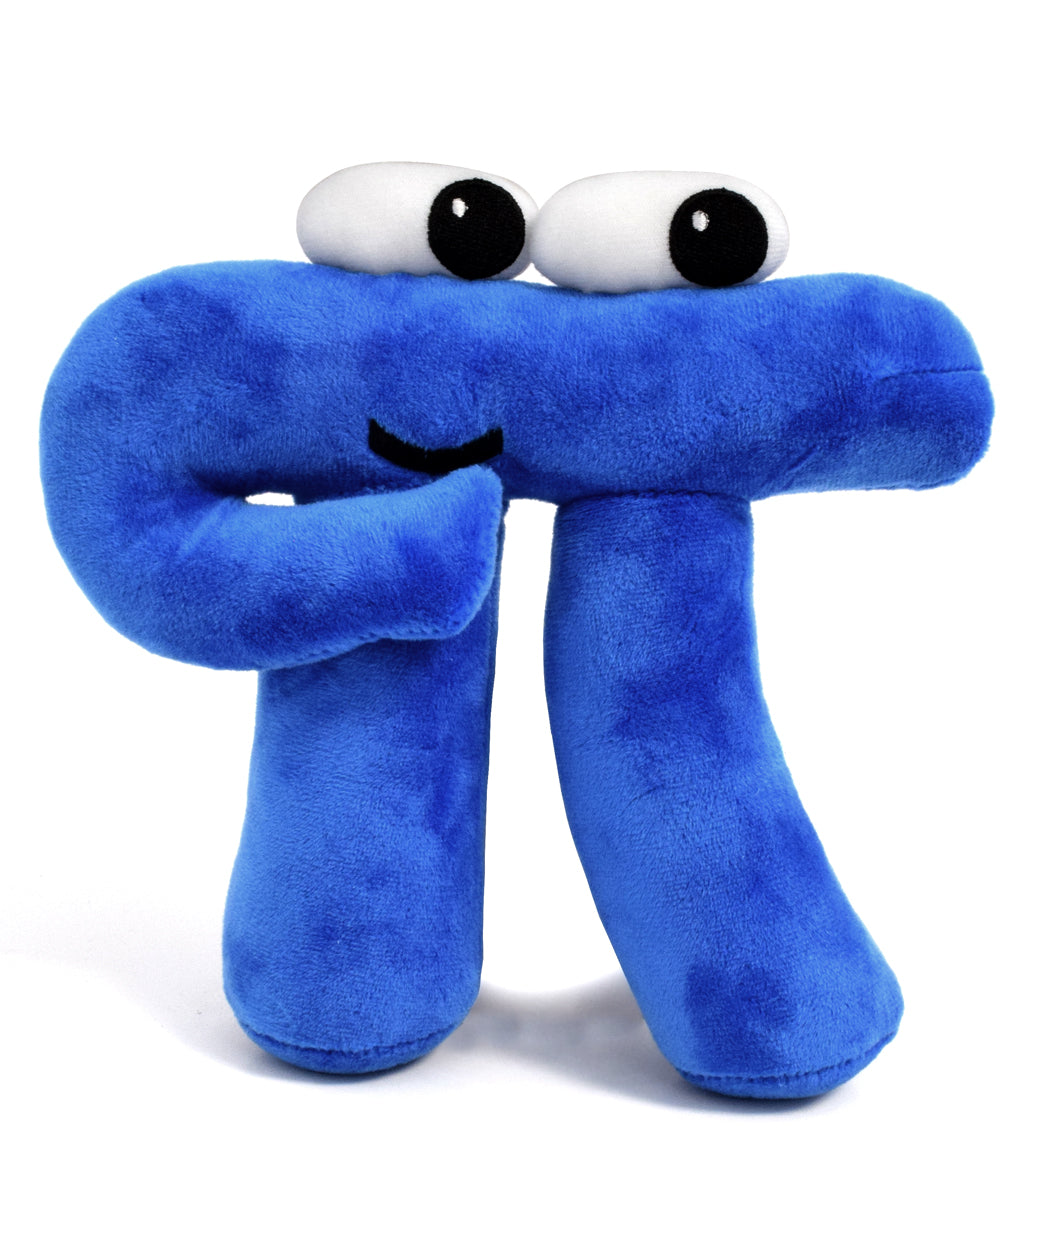 A blue pi with a small black smile and two white oval eyes with black irises on the top of the plushie - from 3Blue1Brown.